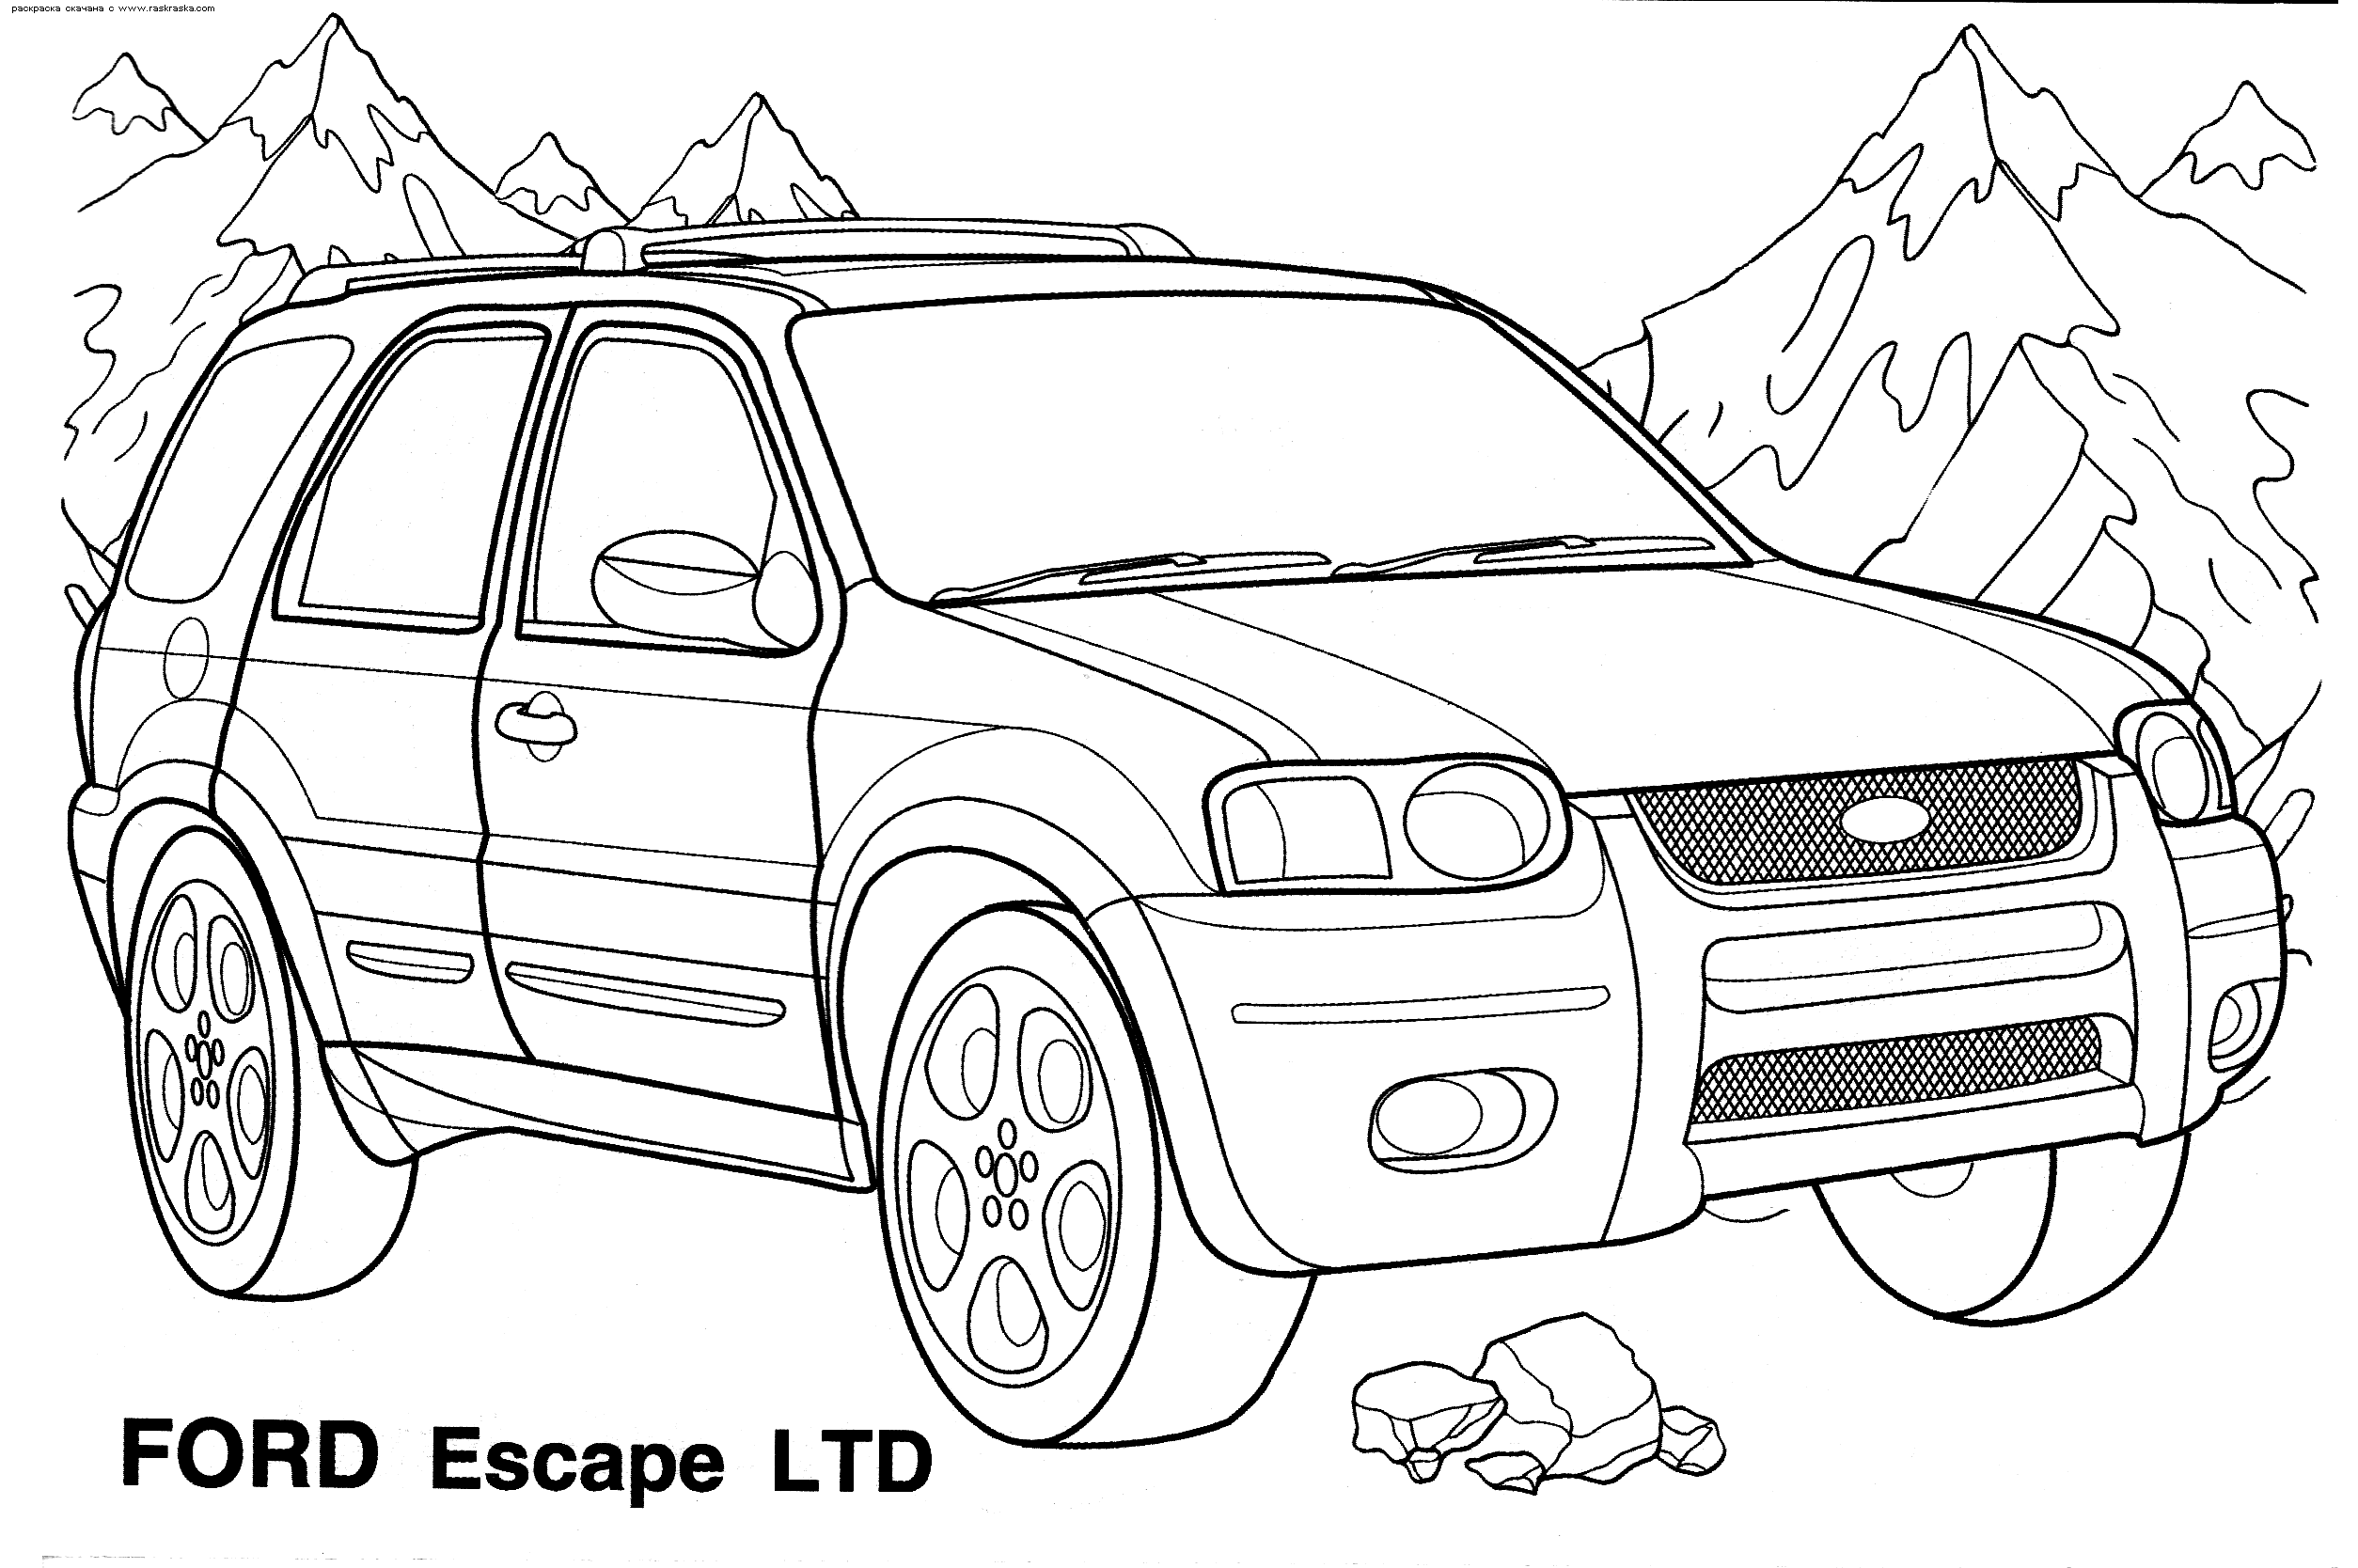 Cars coloring pages | online coloring pages disney | printable coloring pages for kids | #18